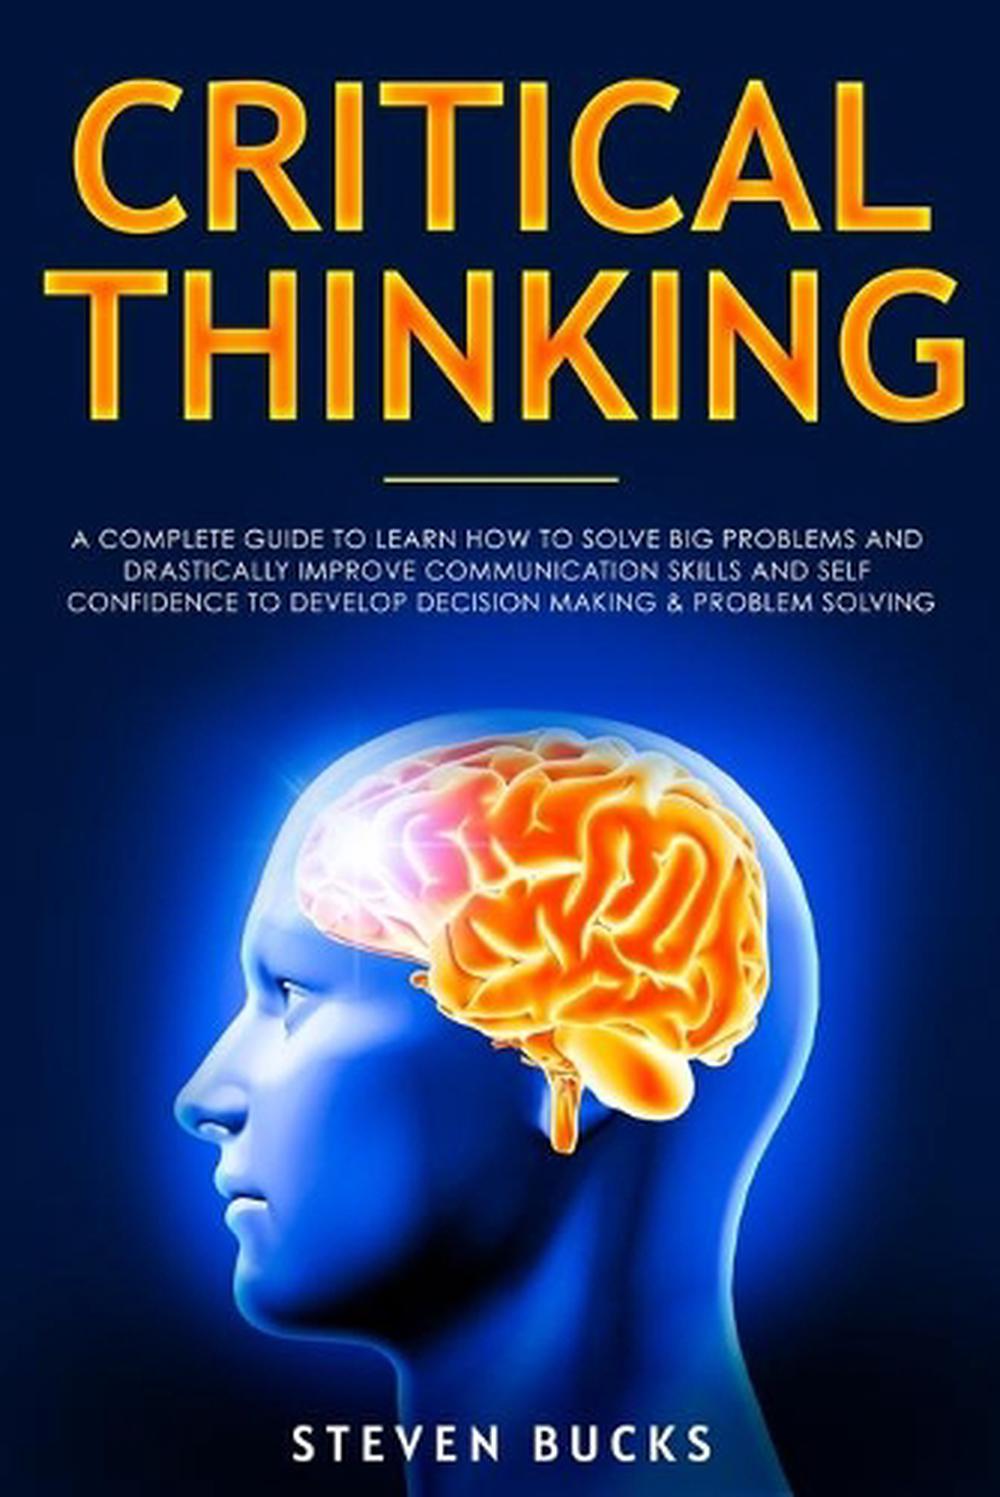 critical thinking questions for books